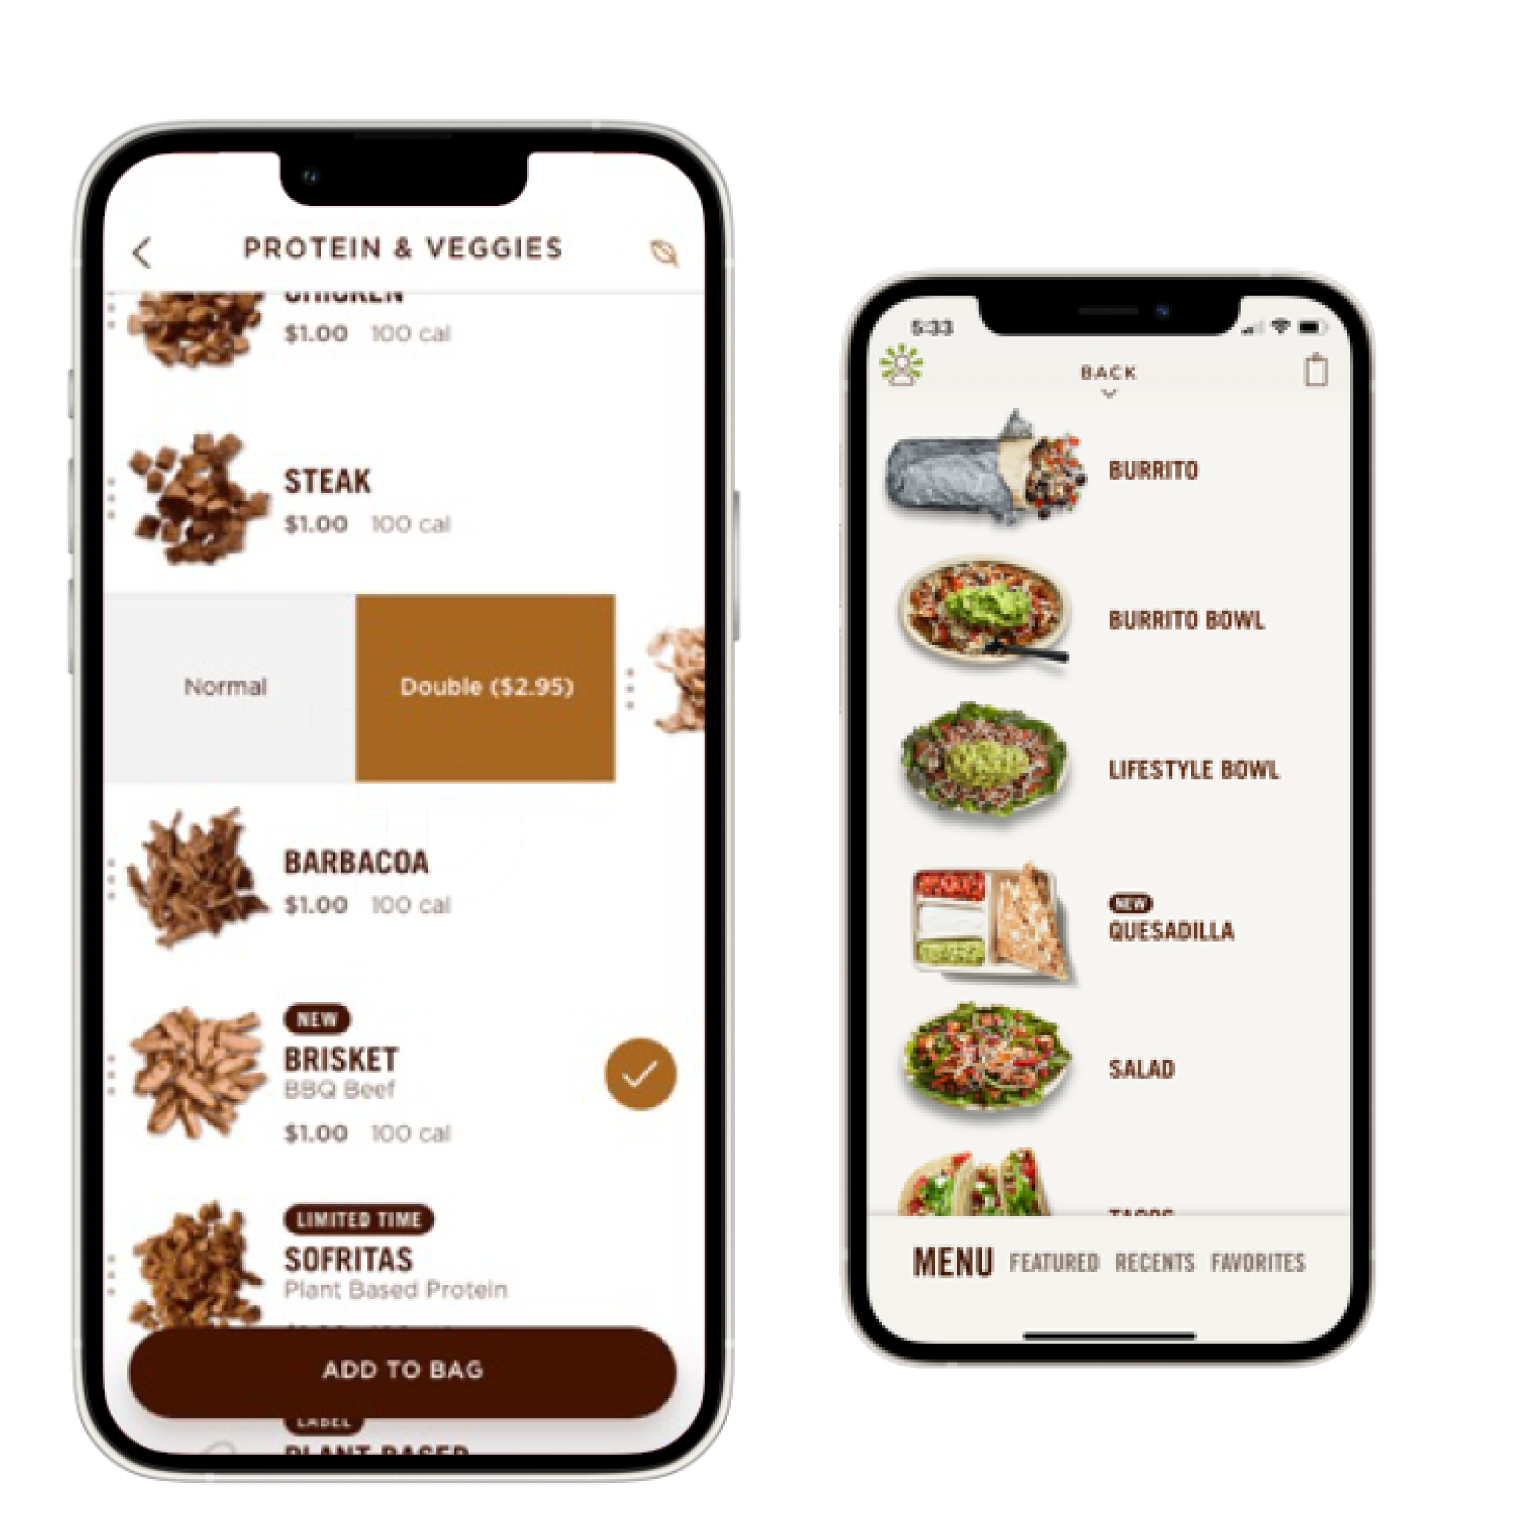 What is Chipotle App & Why is it Considered a Restaurant & Fast Food App?